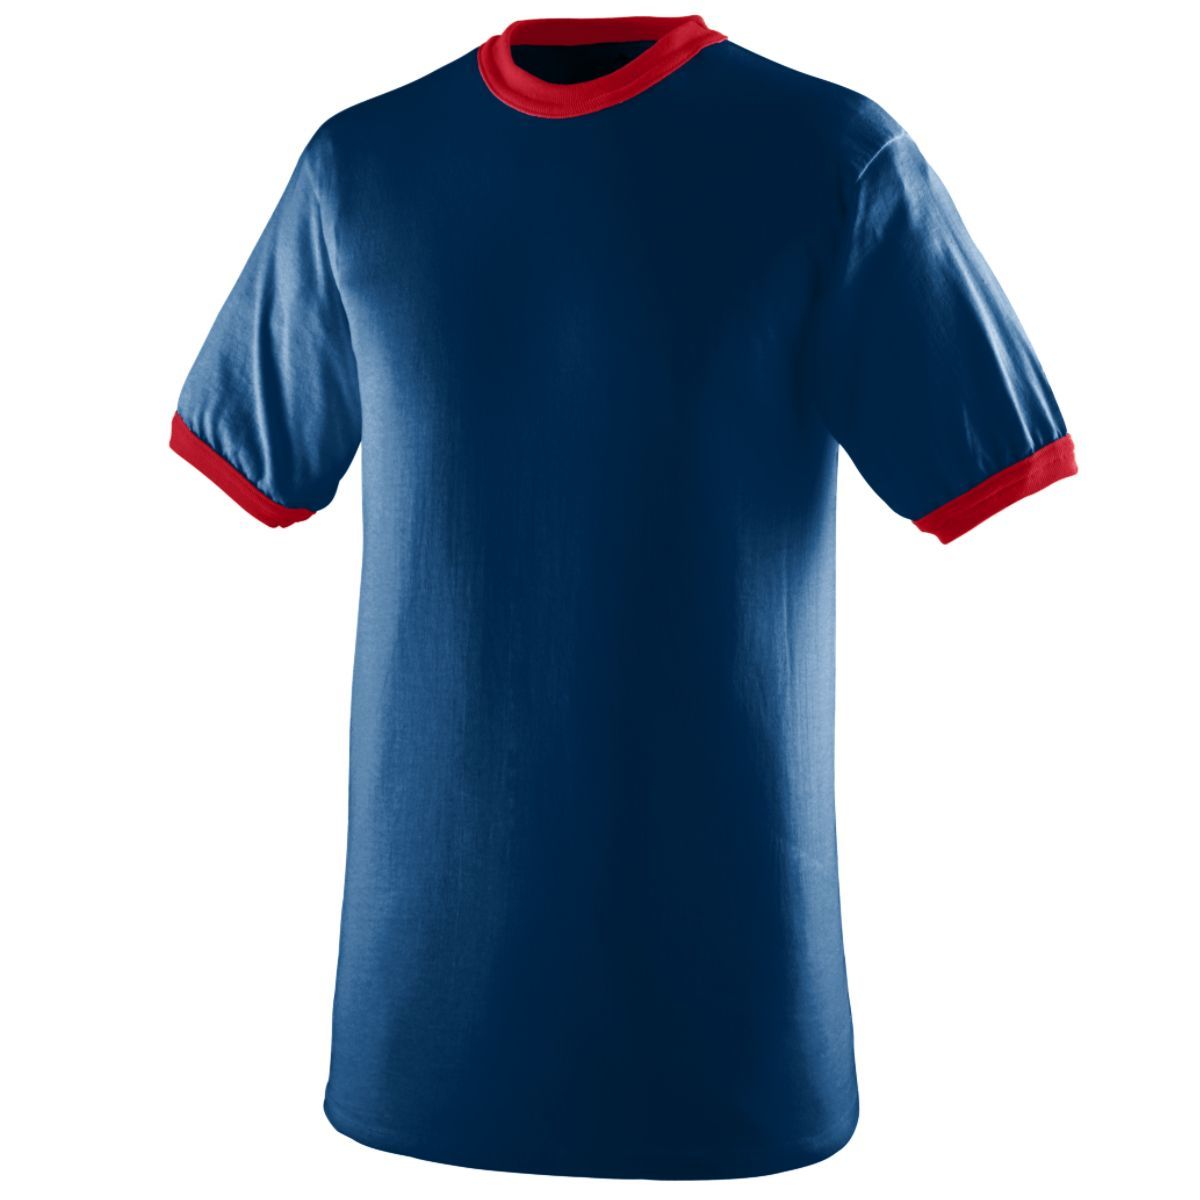 Augusta Sportswear Youth-Ringer T-Shirt in Navy/Red  -Part of the Youth, Youth-Tee-Shirt, T-Shirts, Augusta-Products, Soccer, Shirts, All-Sports-1 product lines at KanaleyCreations.com